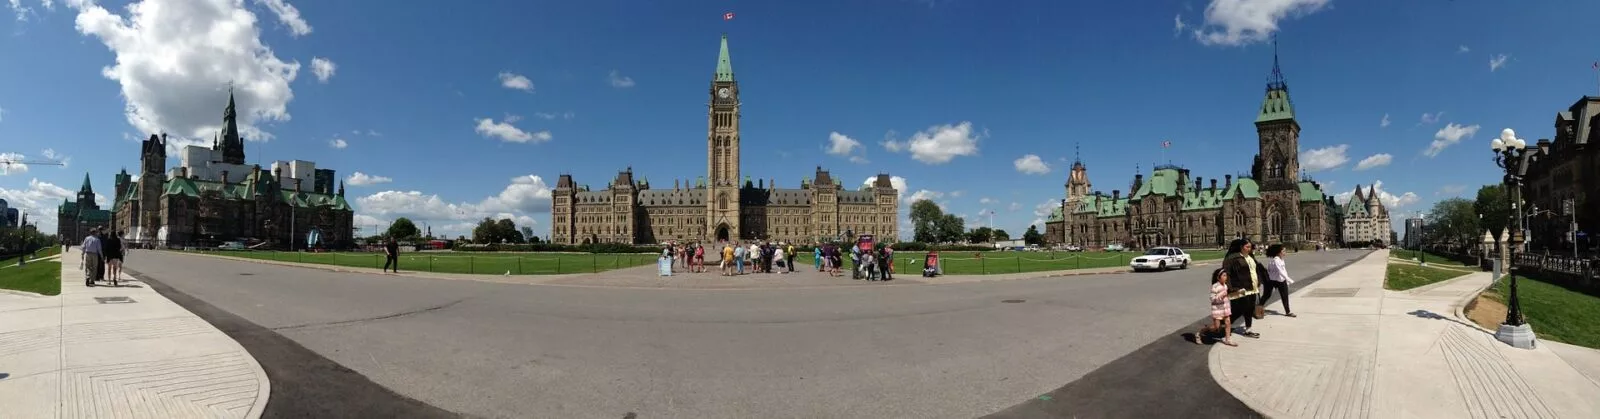 Canada,Ontario,Ottawa, Parliament Hill, mass group of people